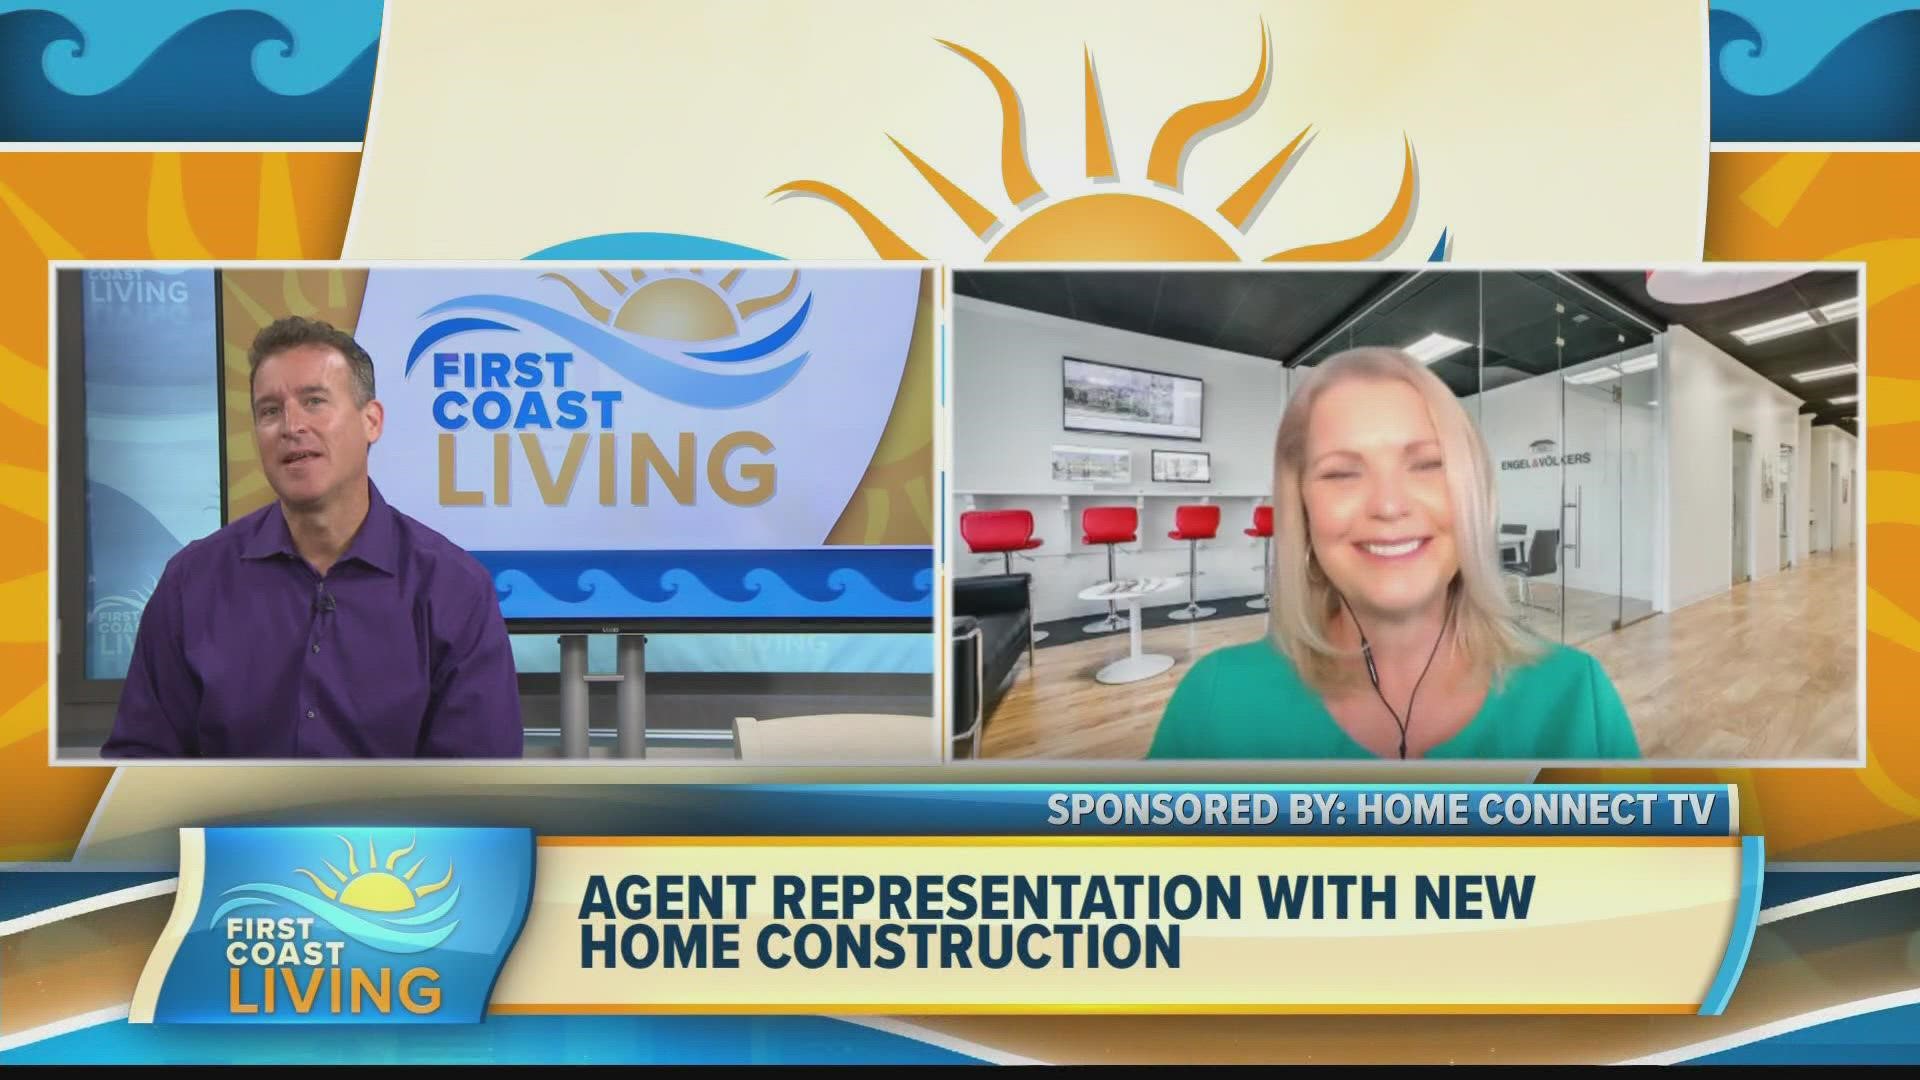 Lesley Barlow of Engel & Volkers, our Home Connect TV expert explains the benefit of having a real estate agent.